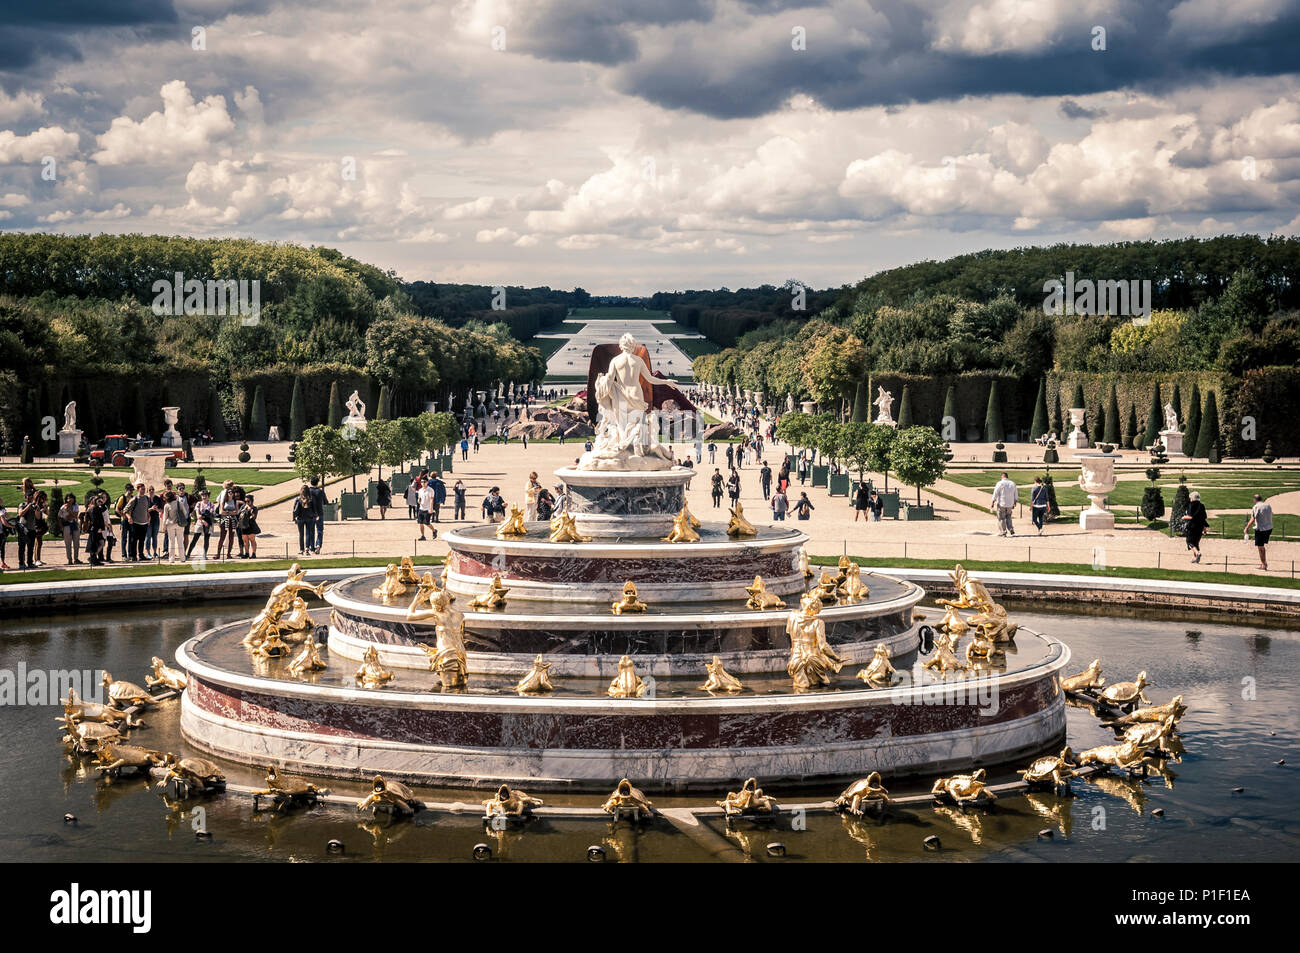 Latona's fountain, in the gardens of Chateau de Versailles, trees in the background against a dramatic blue cloudy sky. Desatured, retro syle. Stock Photo